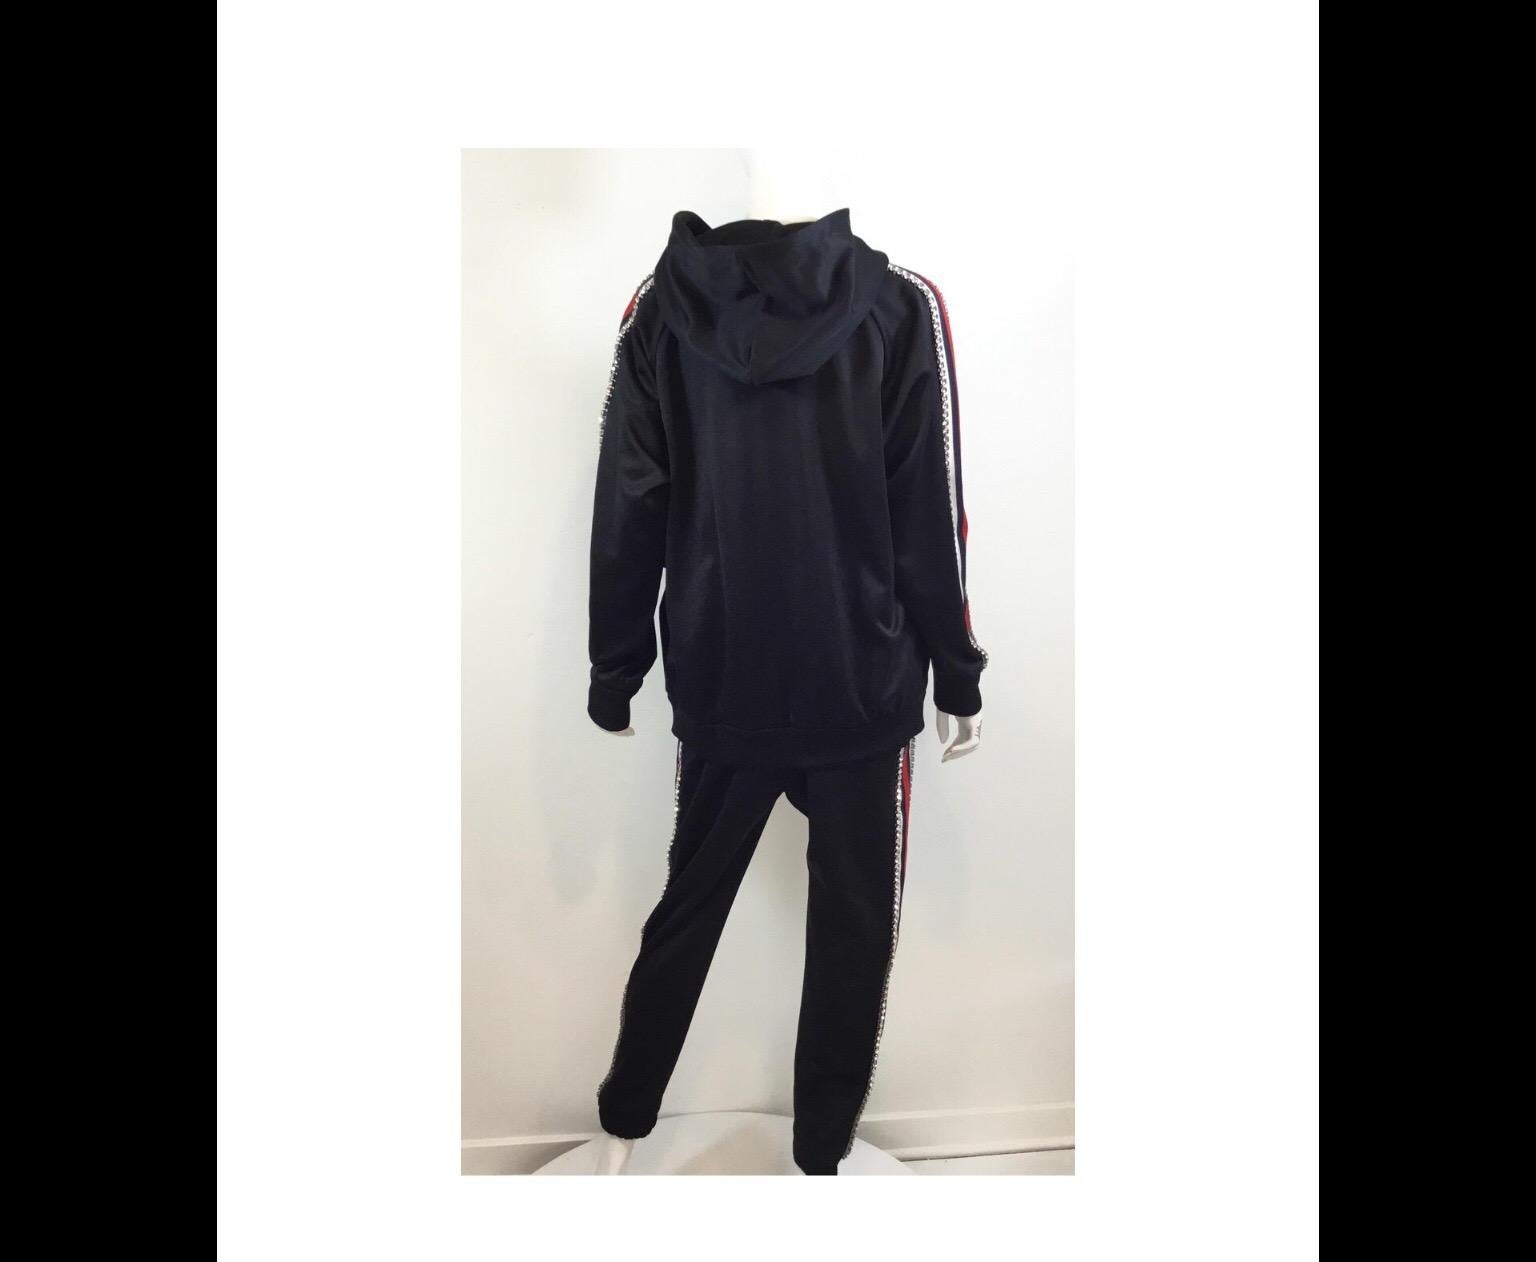 Gucci tracksuit Jacket featured in a black tech-jersey fabric with a red and navy web panel along the sides encrusted with Swarovski crystals. Jacket is hooded and has a zippered fastening. Track suit jacket is brand new with tags, size XL, Made in